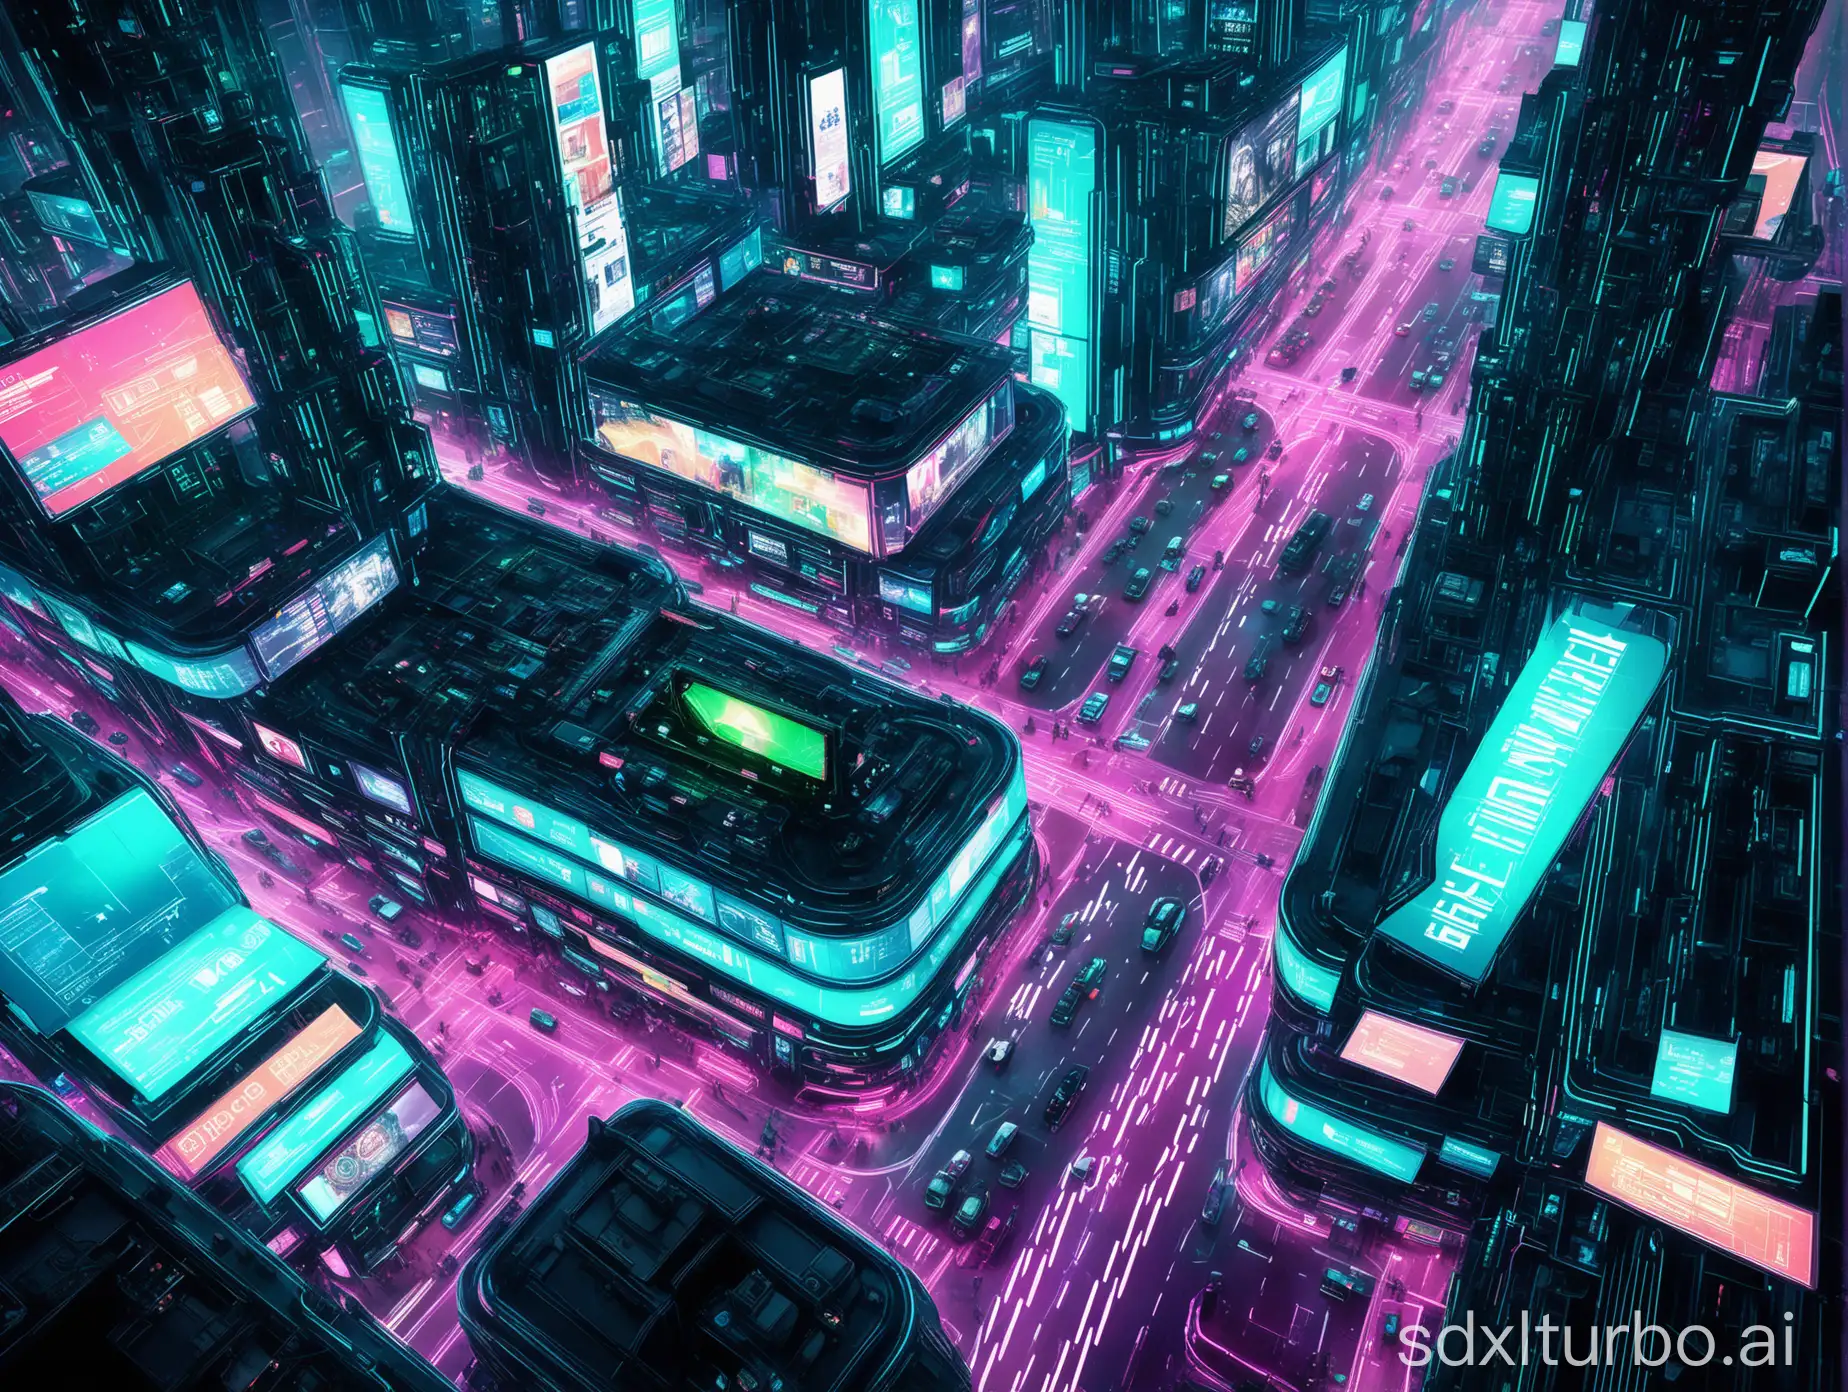 Cyberpunk style, an expansive and bustling night scene of interwoven multiple roads, with a strong sense of technology, viewed from a top-down planar perspective. The scene is predominantly in cool tones, punctuated by vibrant neon lights that provide a stark visual contrast. Billboards display advertisements for the latest technological products, and traffic lights are presented in a digital format. On the streets, futuristic vehicles flow smoothly, pedestrians move along high-tech sidewalks, flying cars zip through the lower airspace, and digital information streams interweave above the streets. The entire scene is crafted with lighting effects and intricate details to create a planar high-tech urban landscape devoid of three-dimensional buildings. 